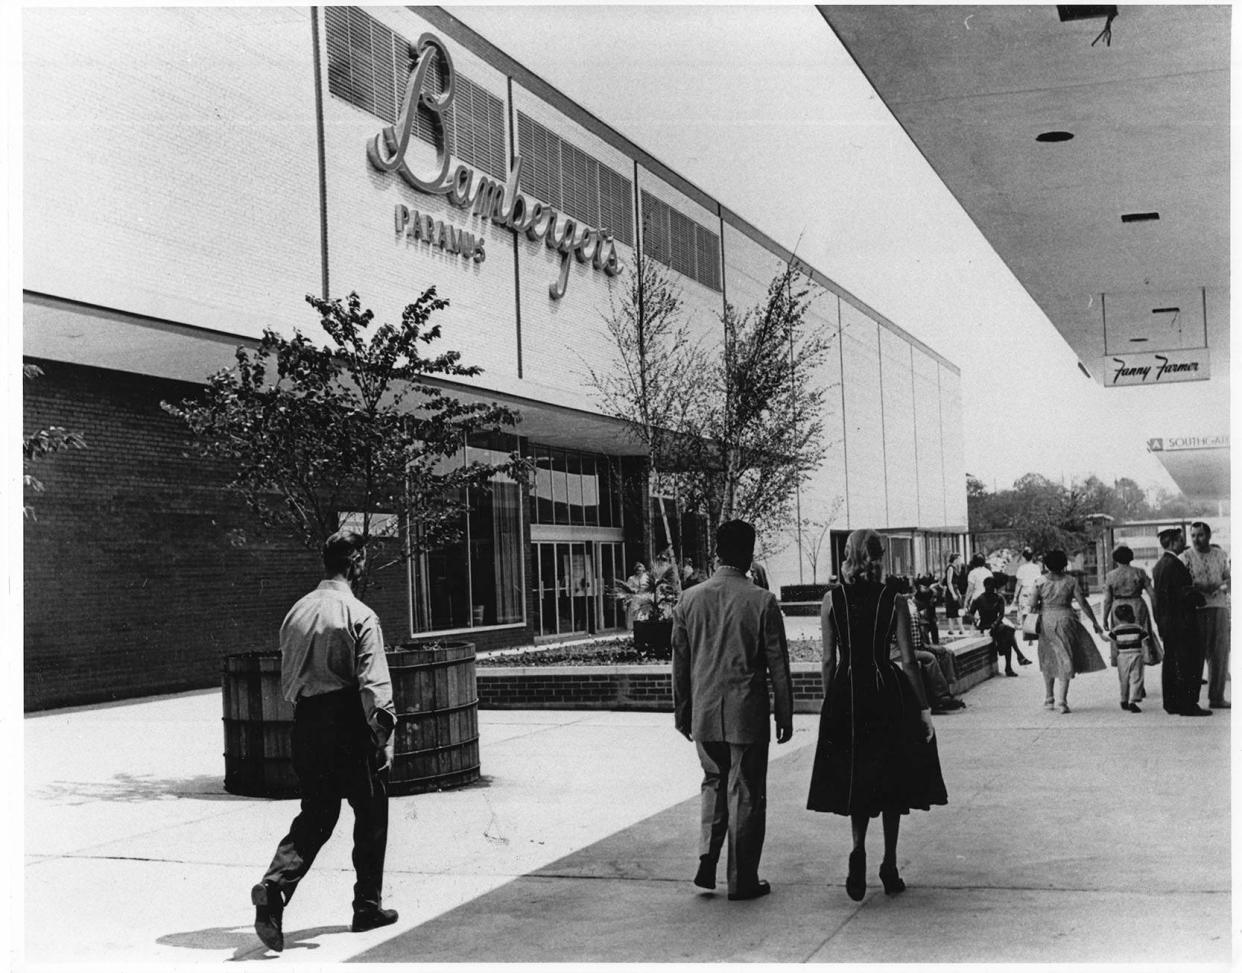 Bamberger's department store at the Garden State Plaza. Unknown date.